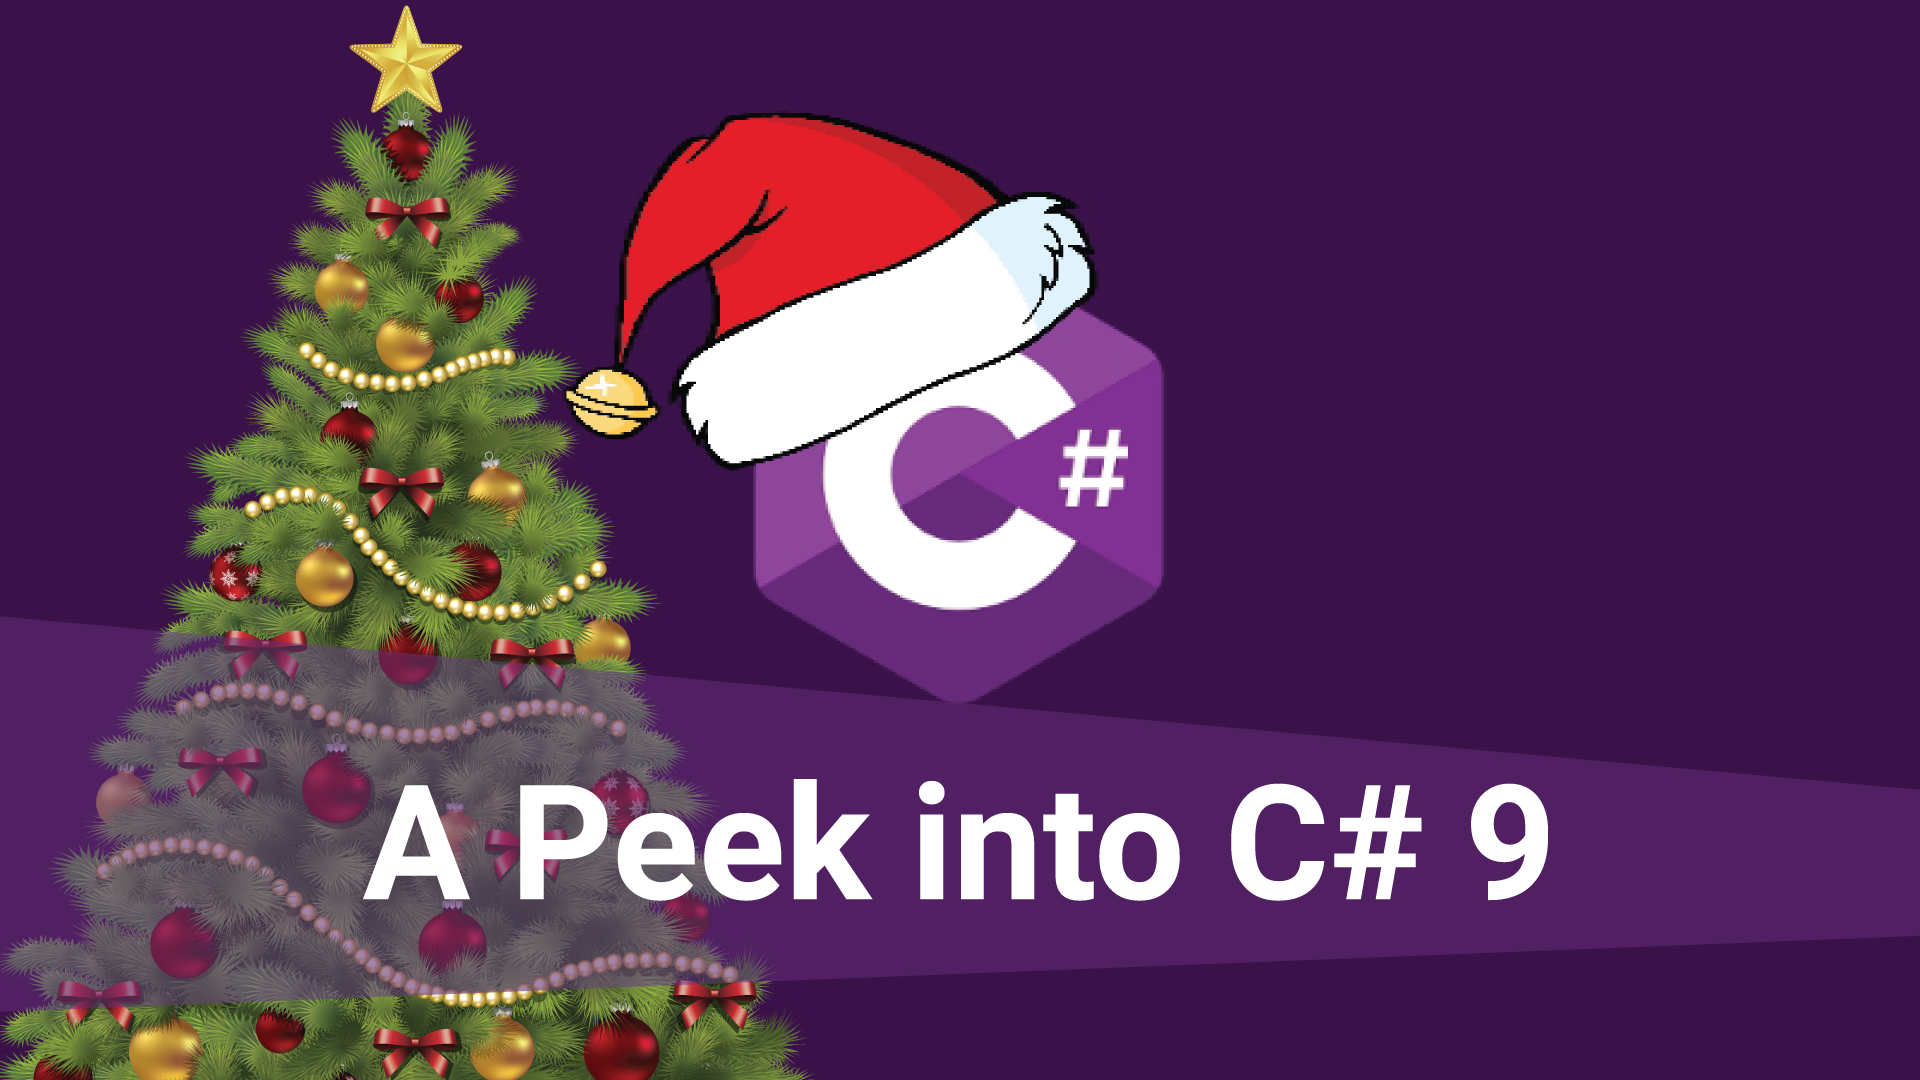 C# 8 is old news.  Onward, to C# 9!